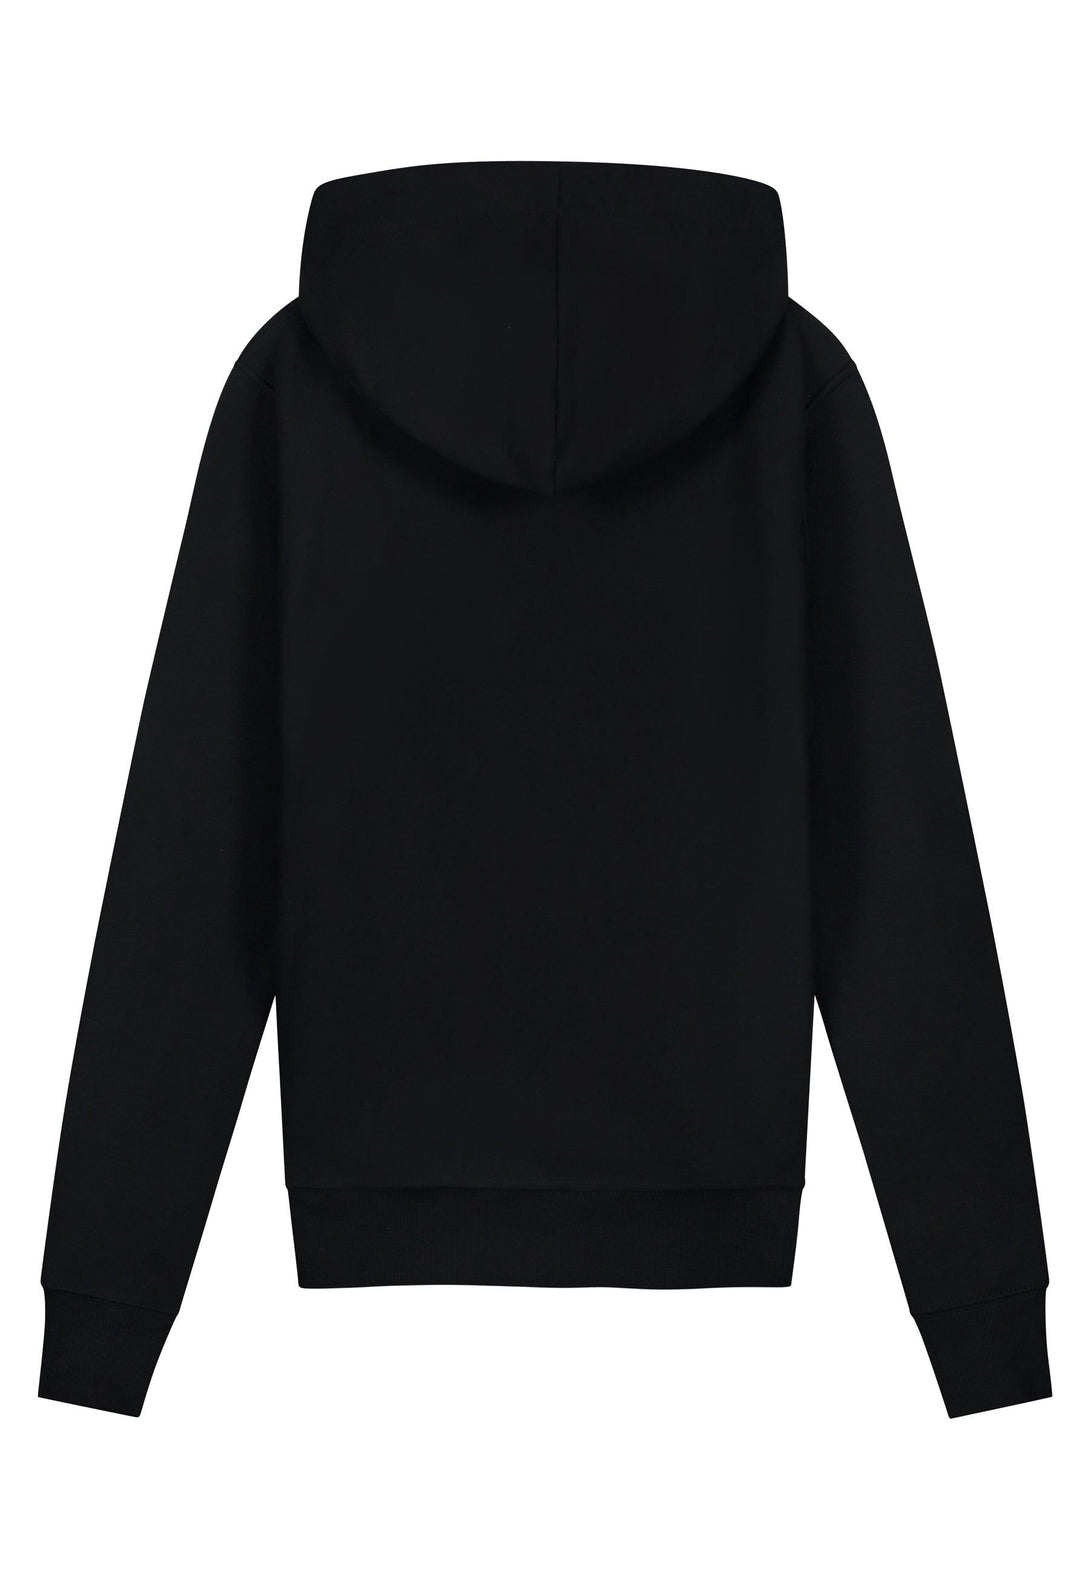 – The Collect hoodie Label Amsterdam Black Artwork